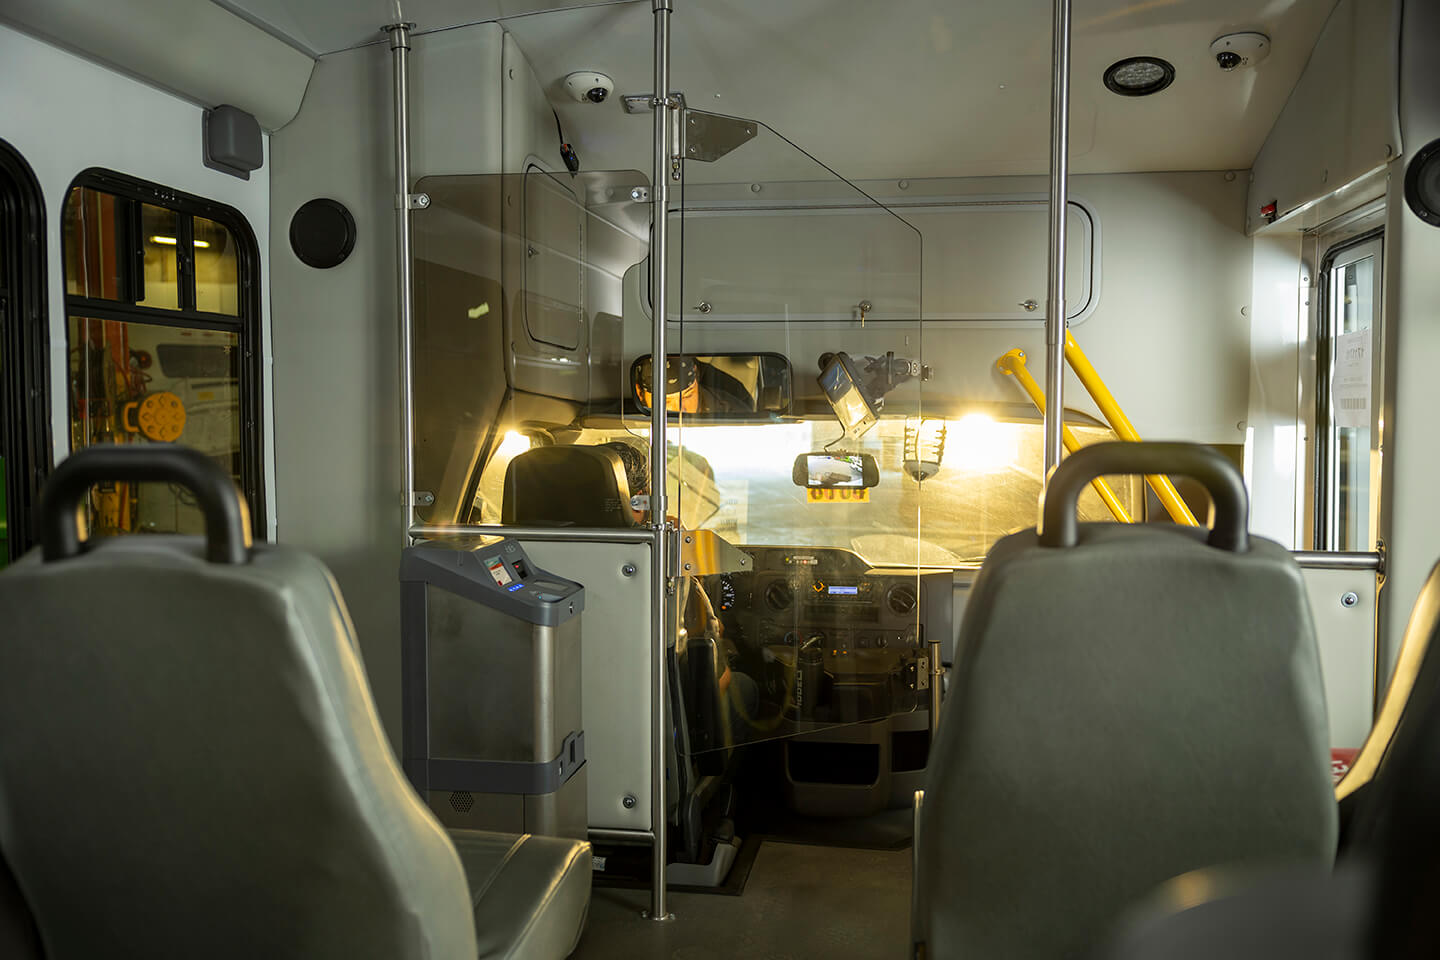 The inside of a bus.